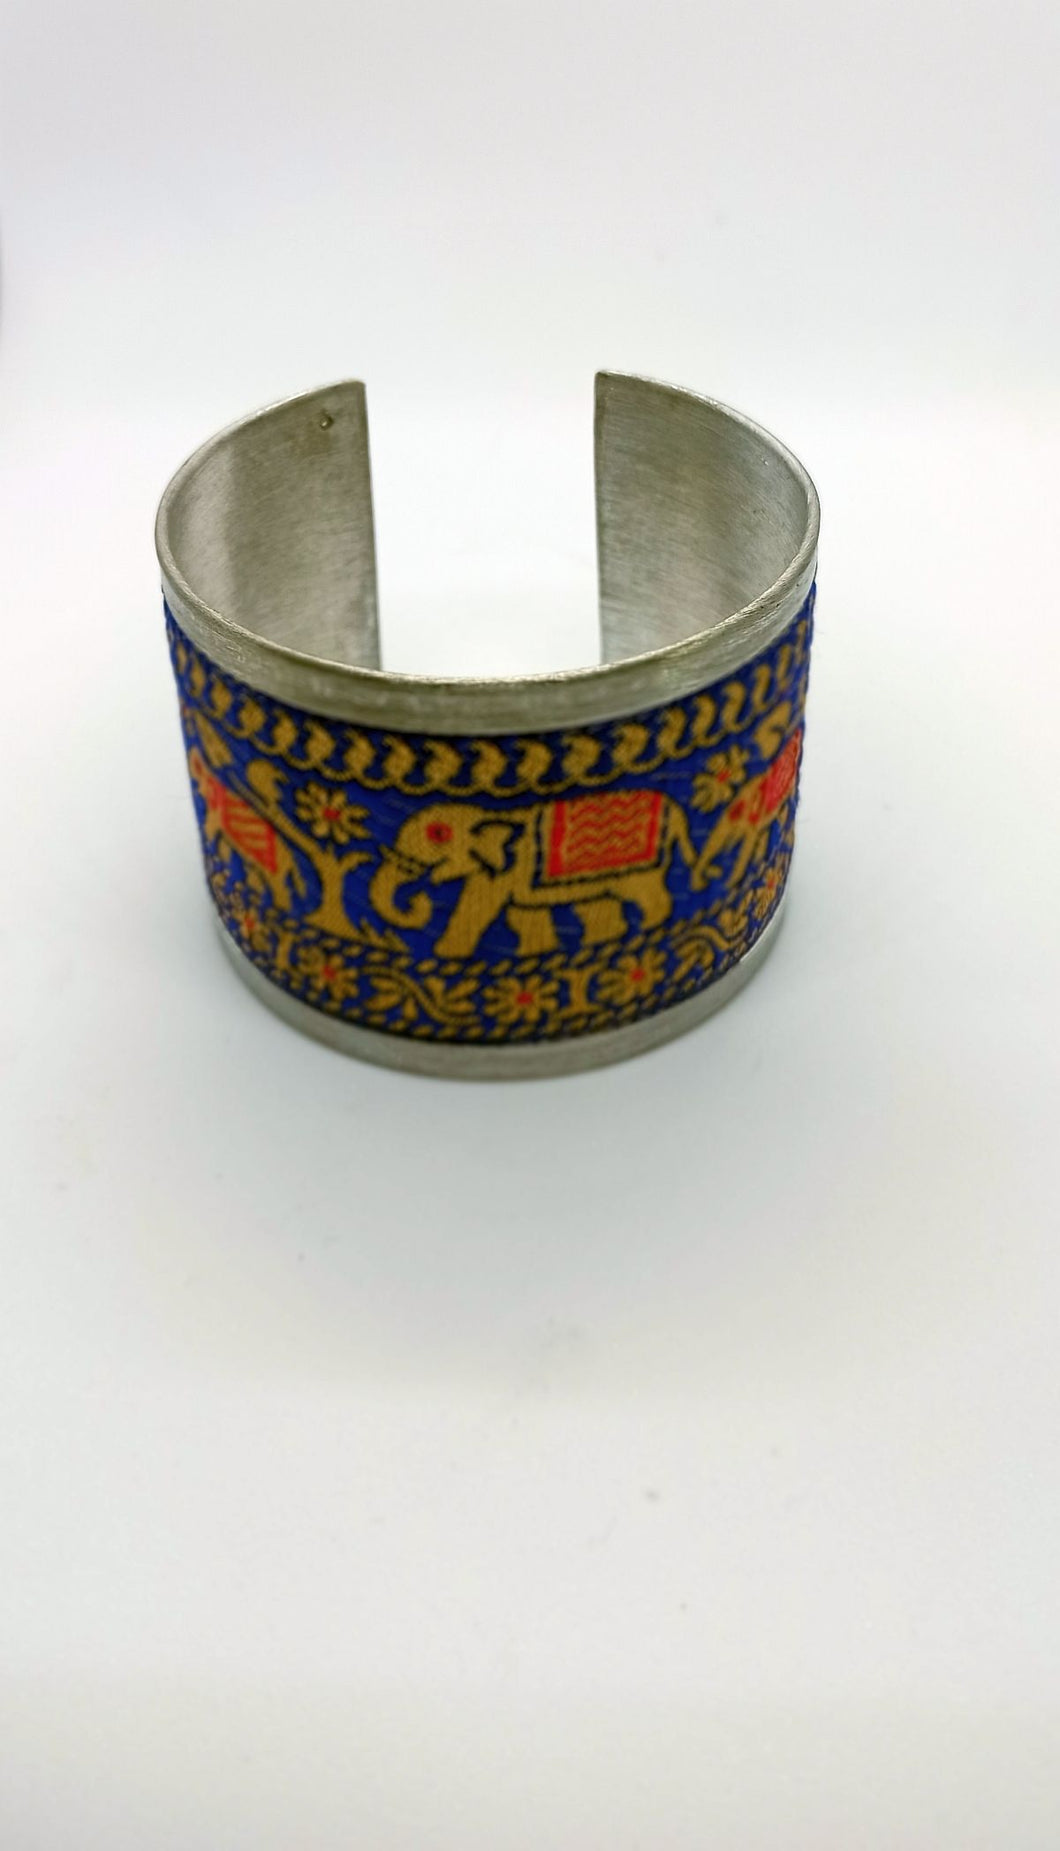 Blue Elephant Cuff : : cloth and metal embroidered jewellery hand-made in India